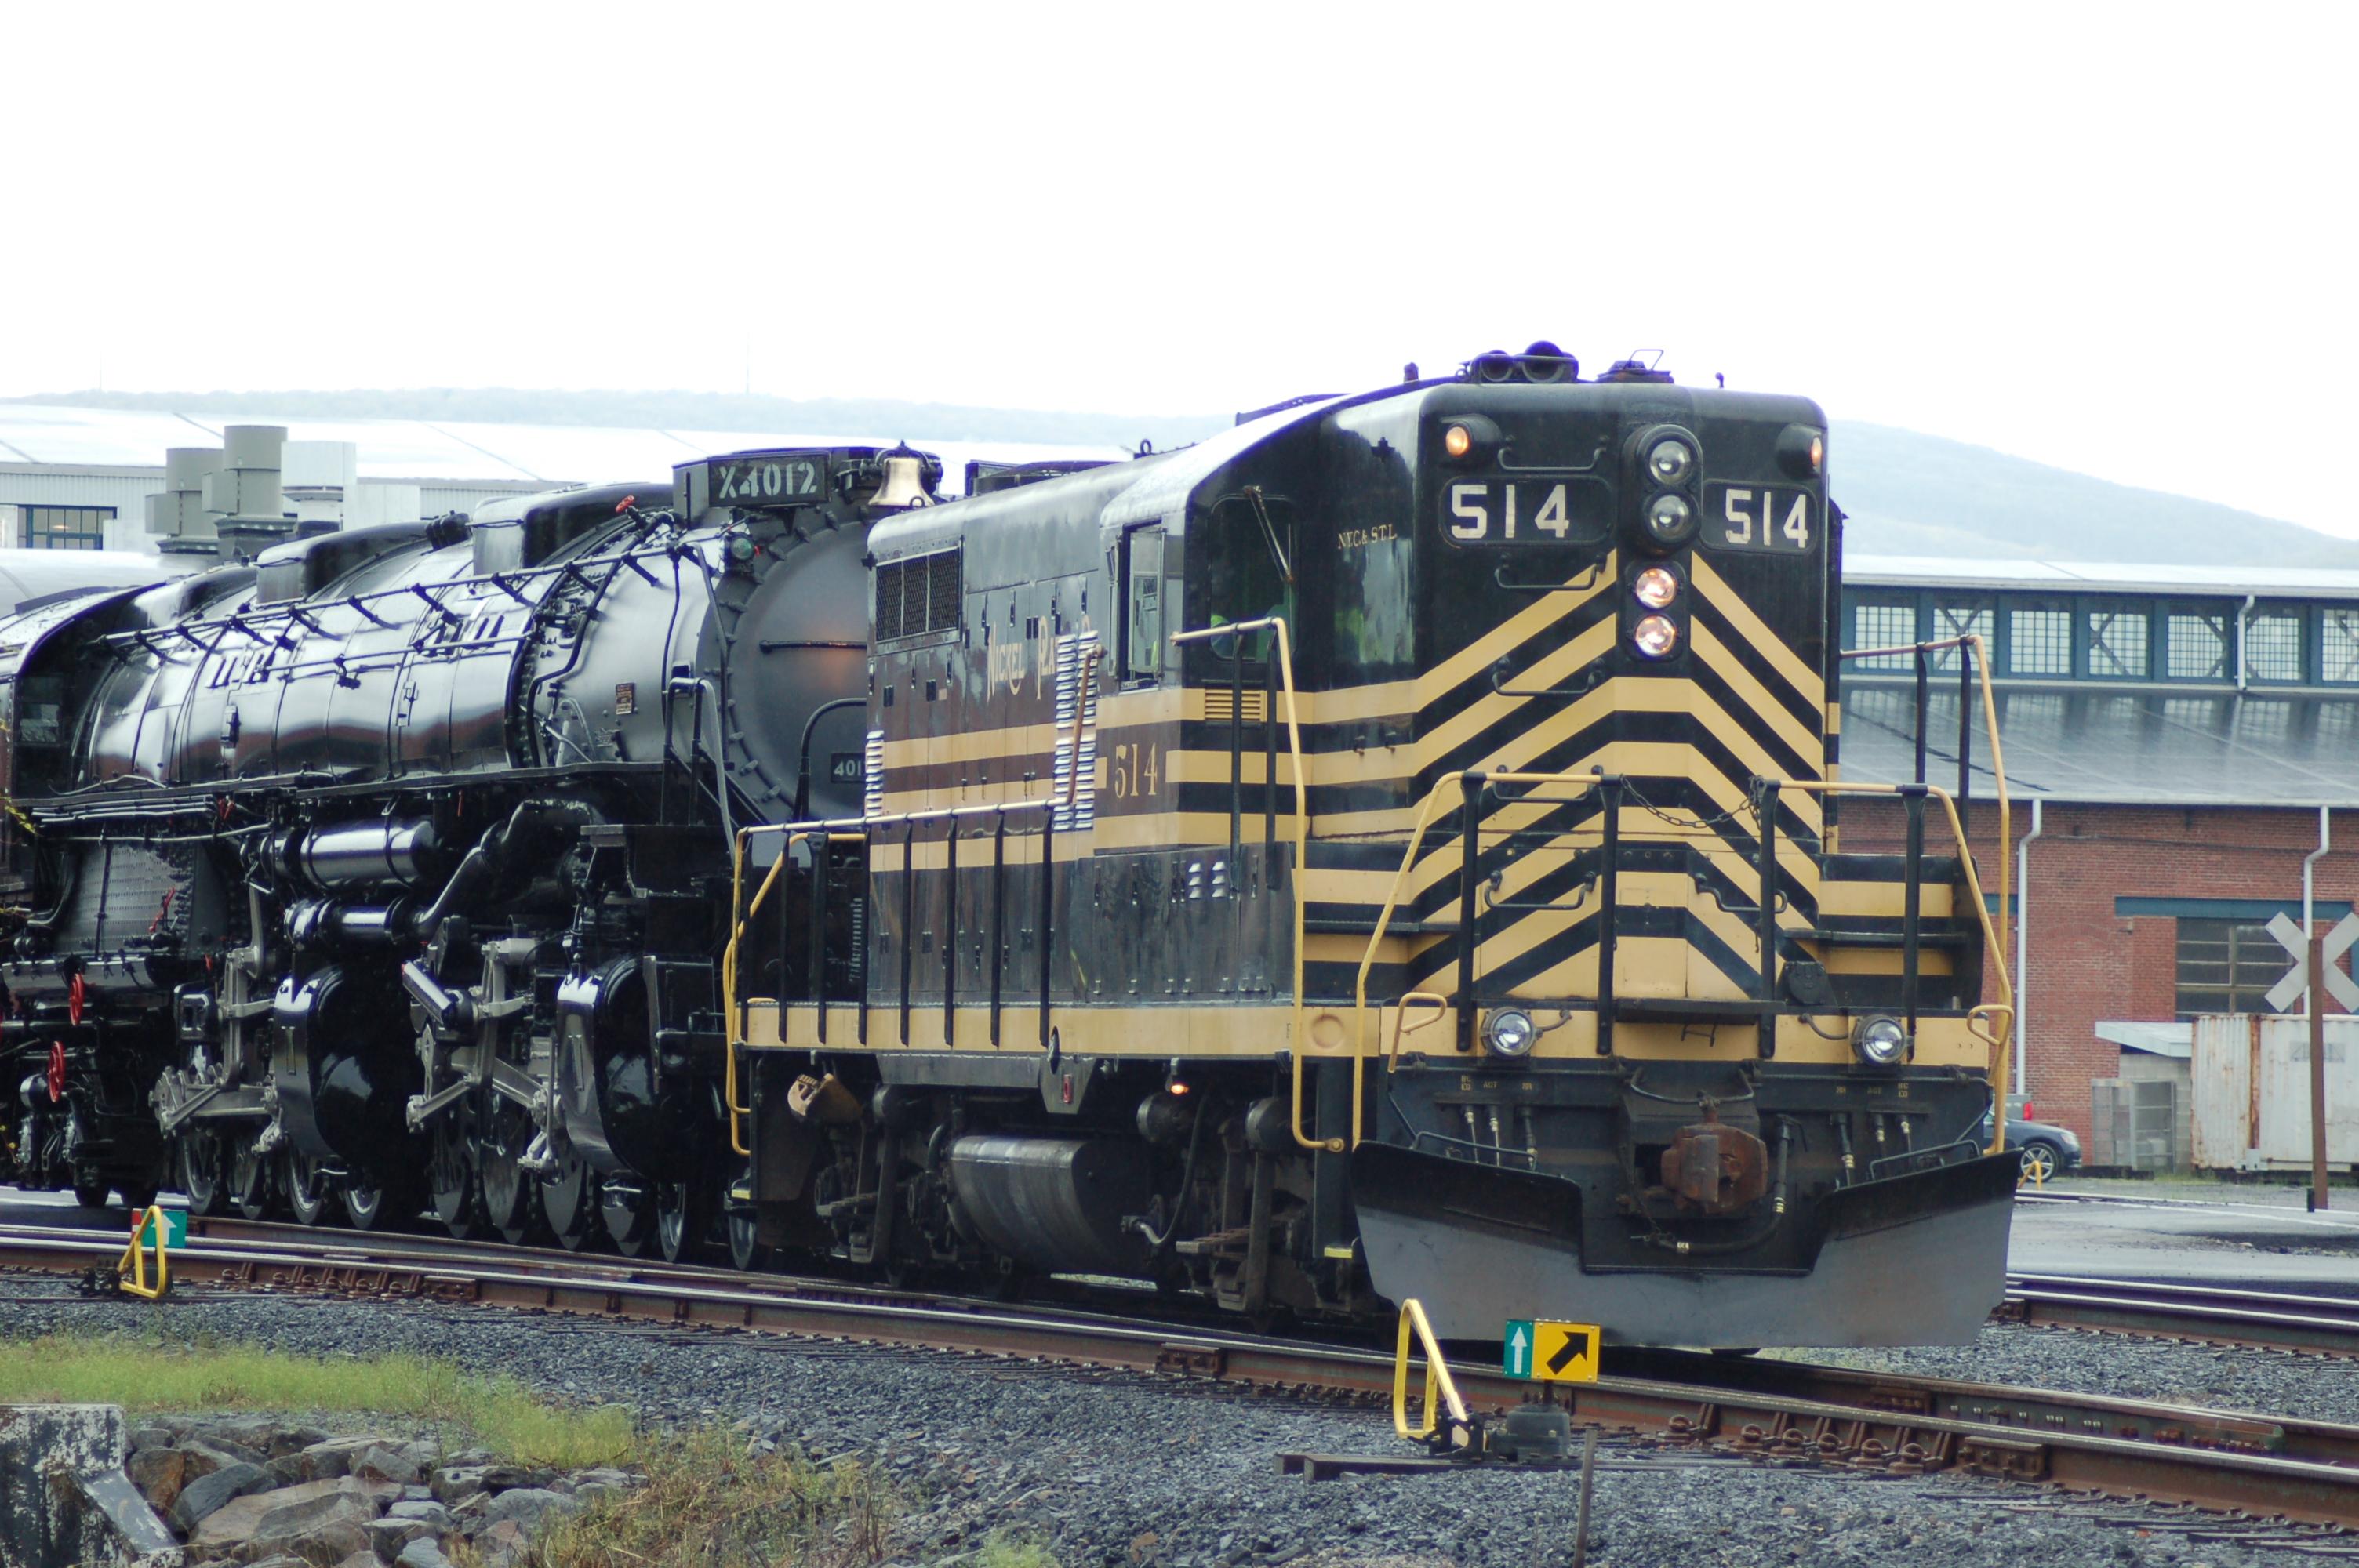 black train with yellow horizontal stripes and the number 514 pulling a larger black train on tracks